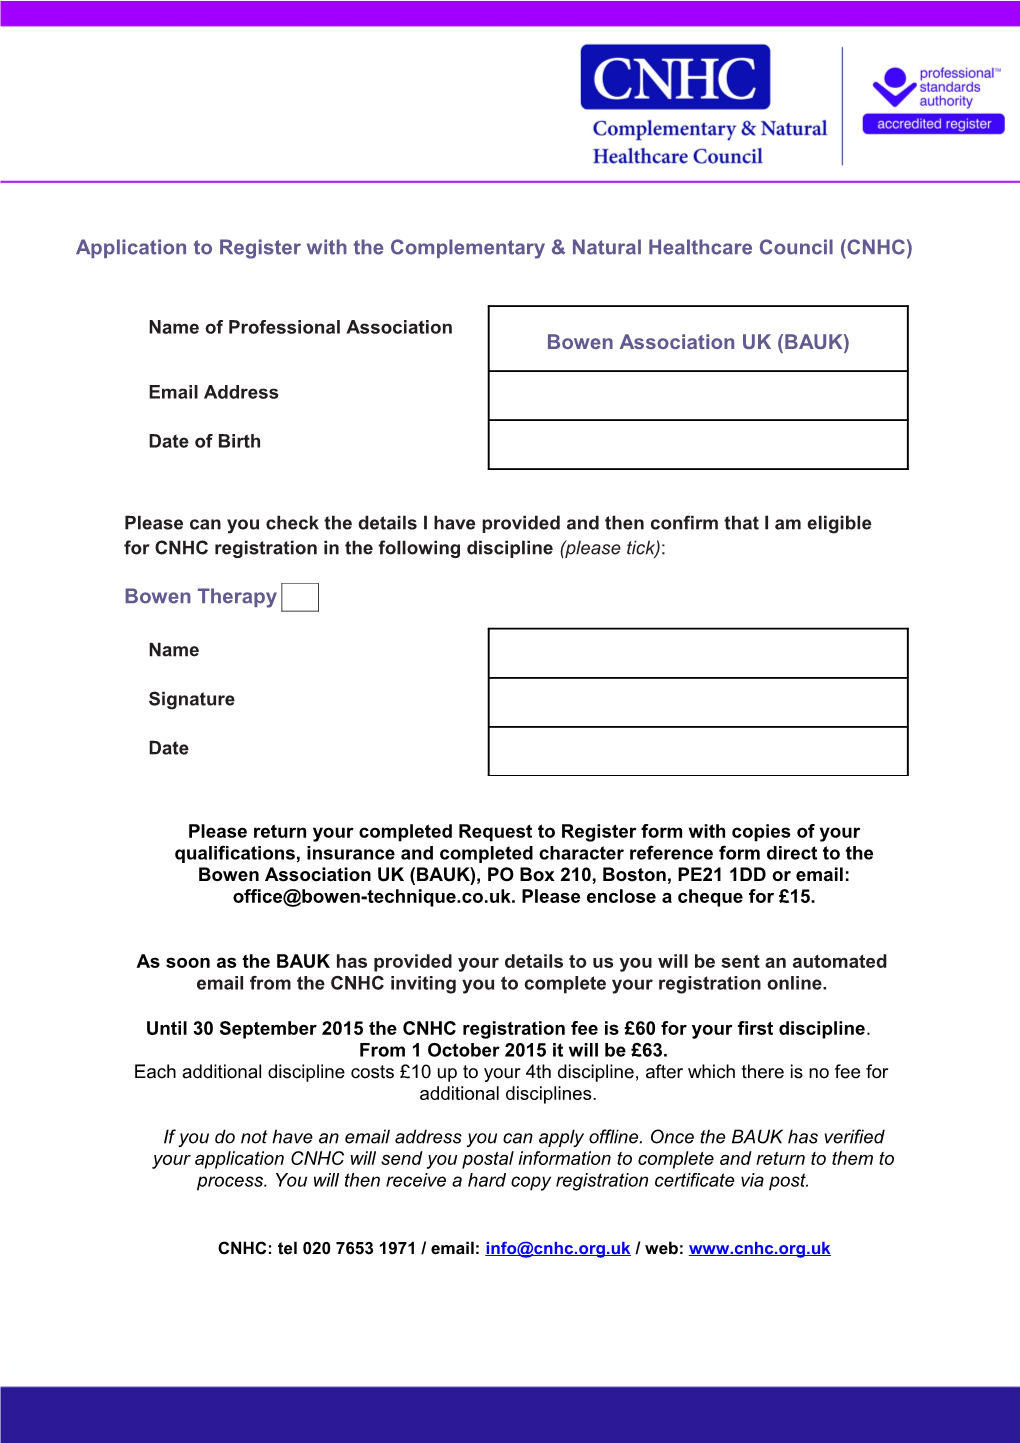 Application to Register with the Complementary & Natural Healthcare Council (CNHC)